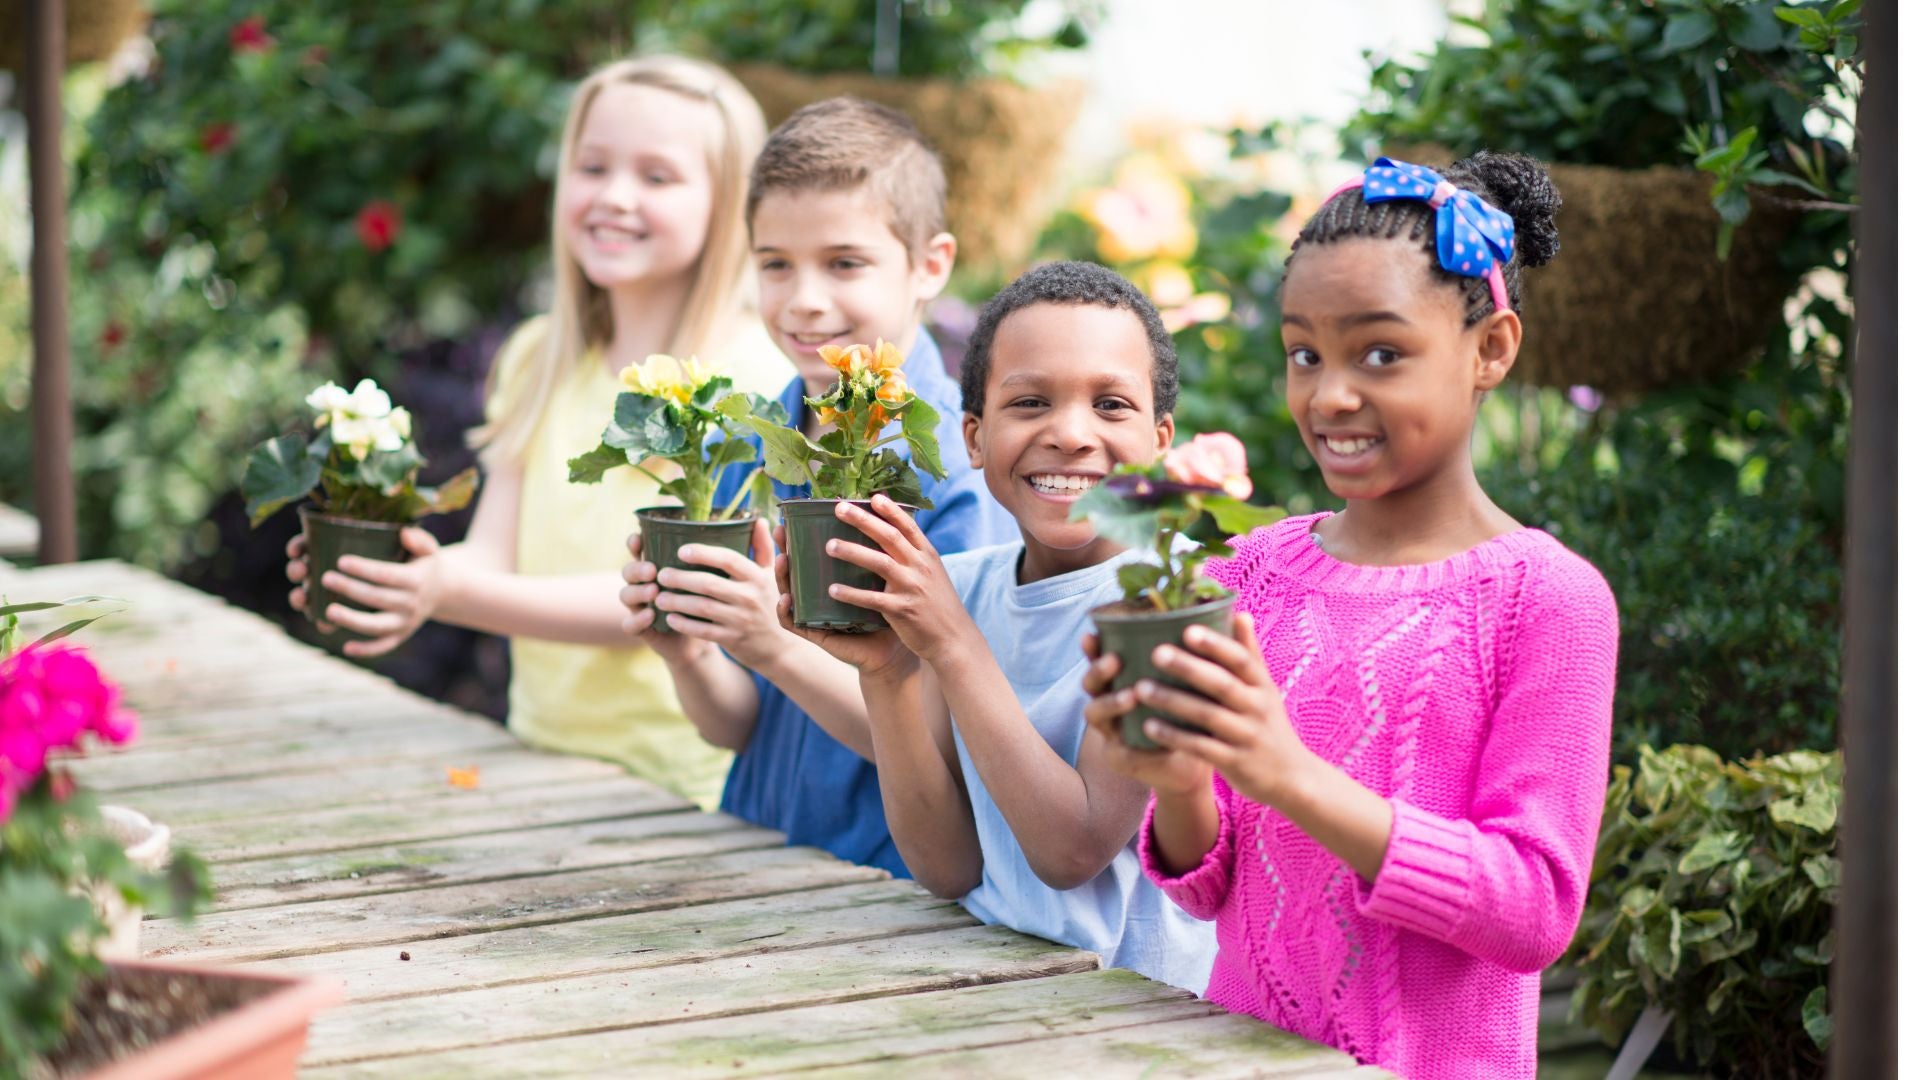 Why You Should Get Your Children Involved in the Garden